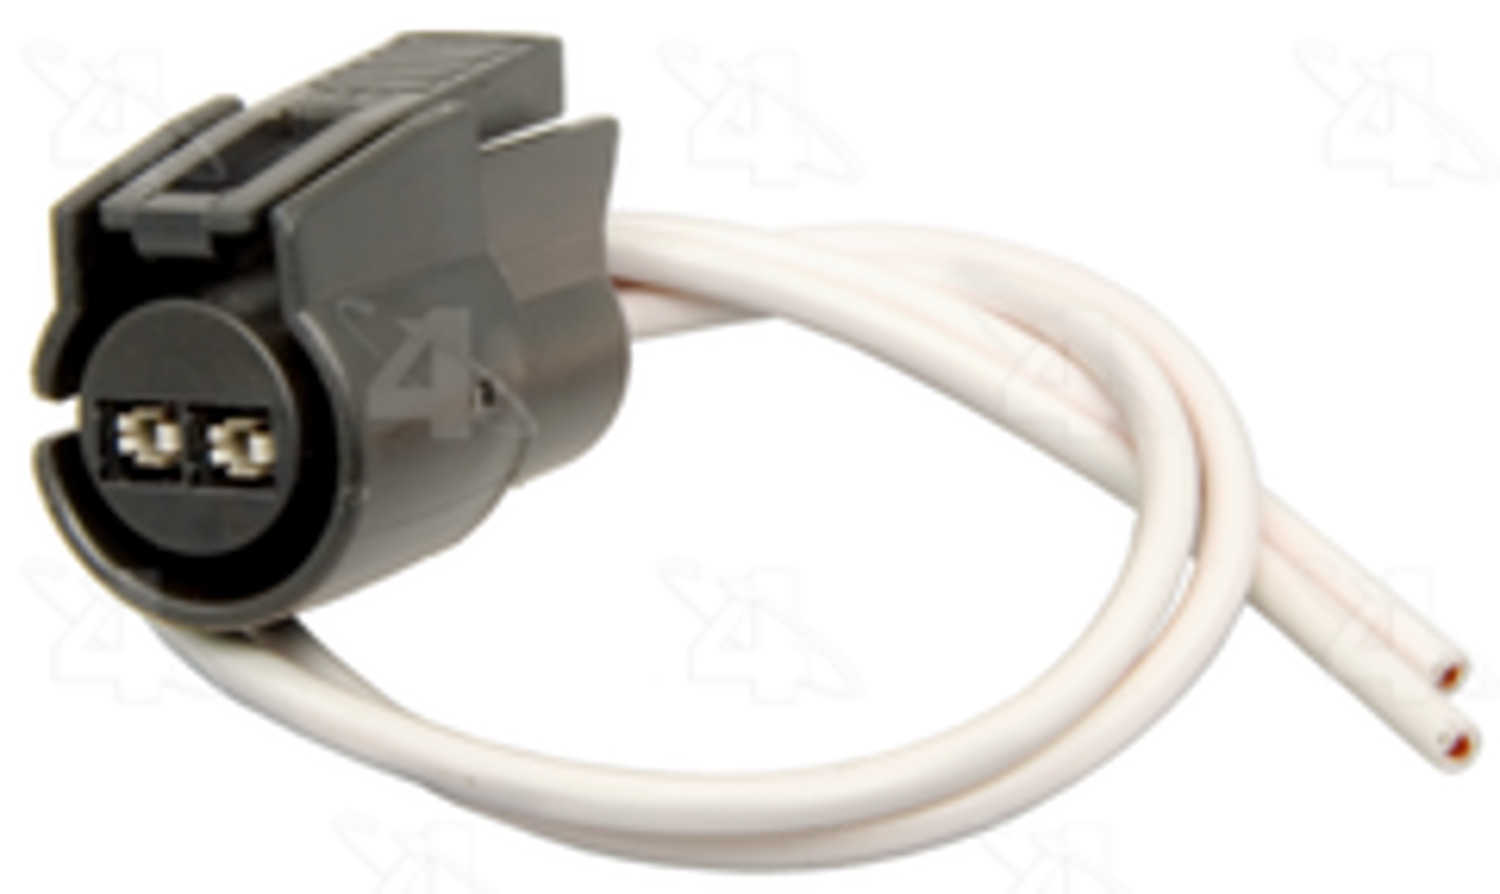 FOUR SEASONS - A/C Compressor Cut-Out Switch Harness Connector - FSE 37227